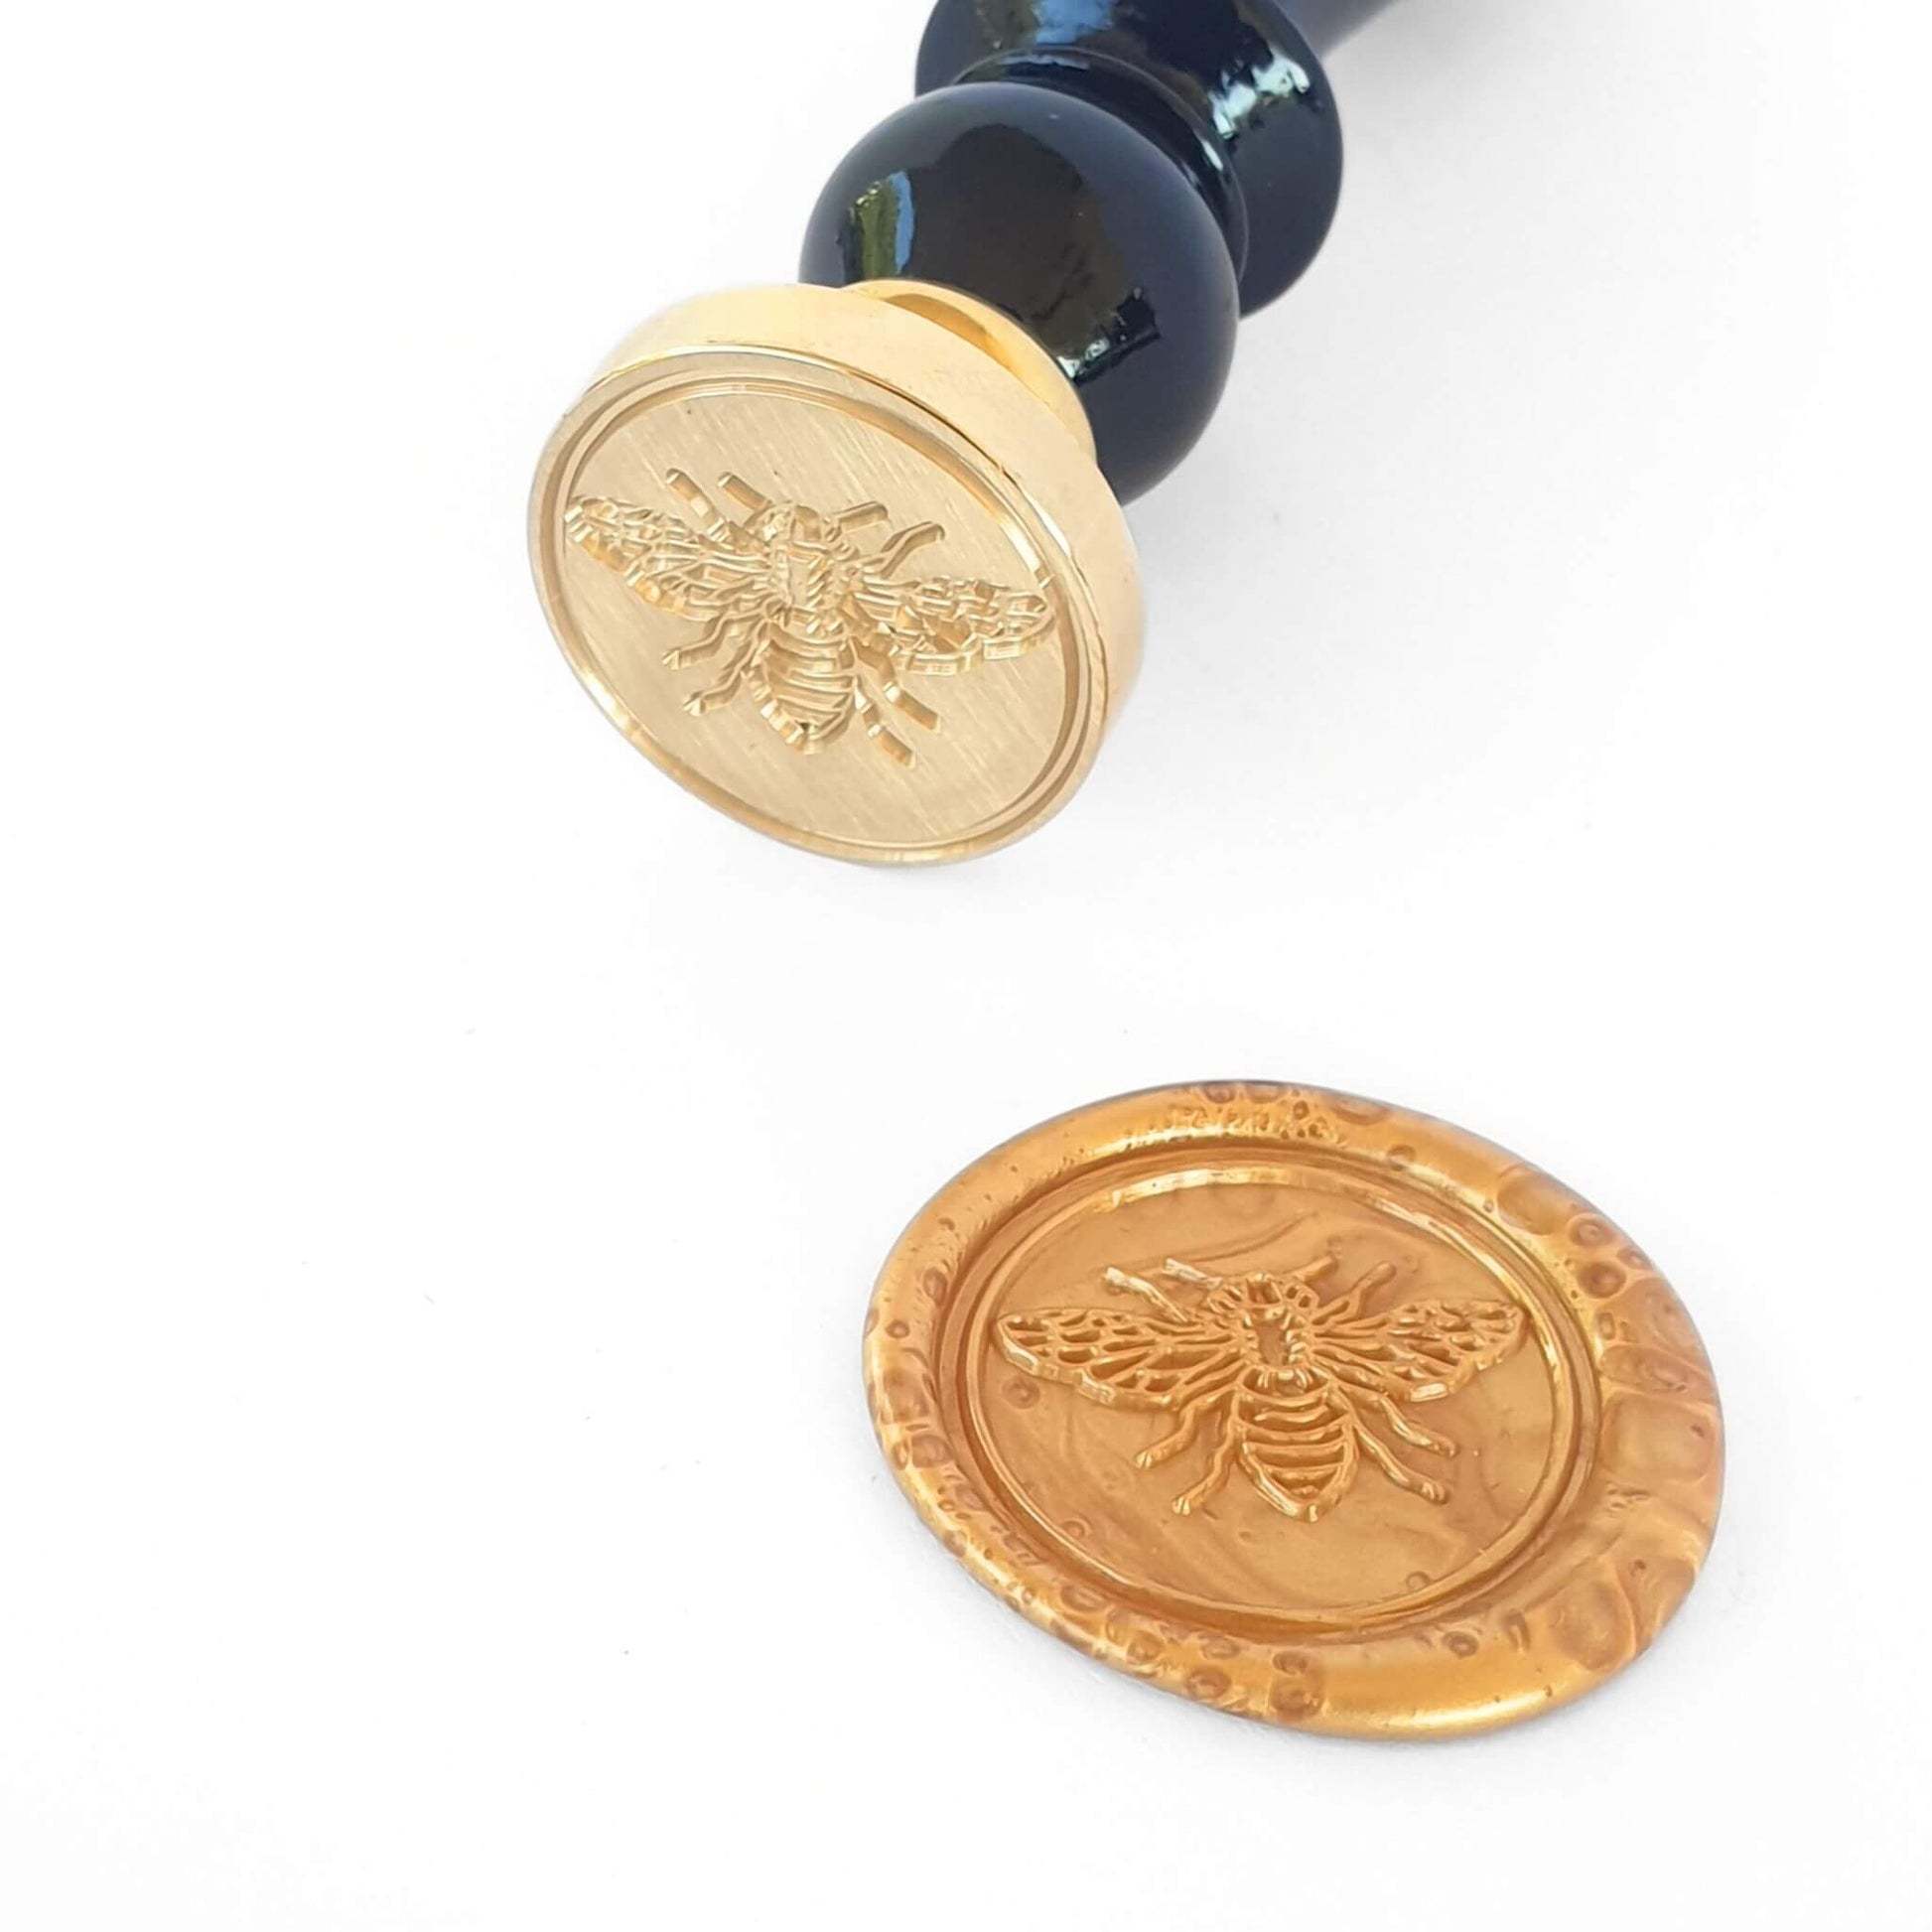 Wax Seal with bumble bee design and black handle next to gold bee wax seal